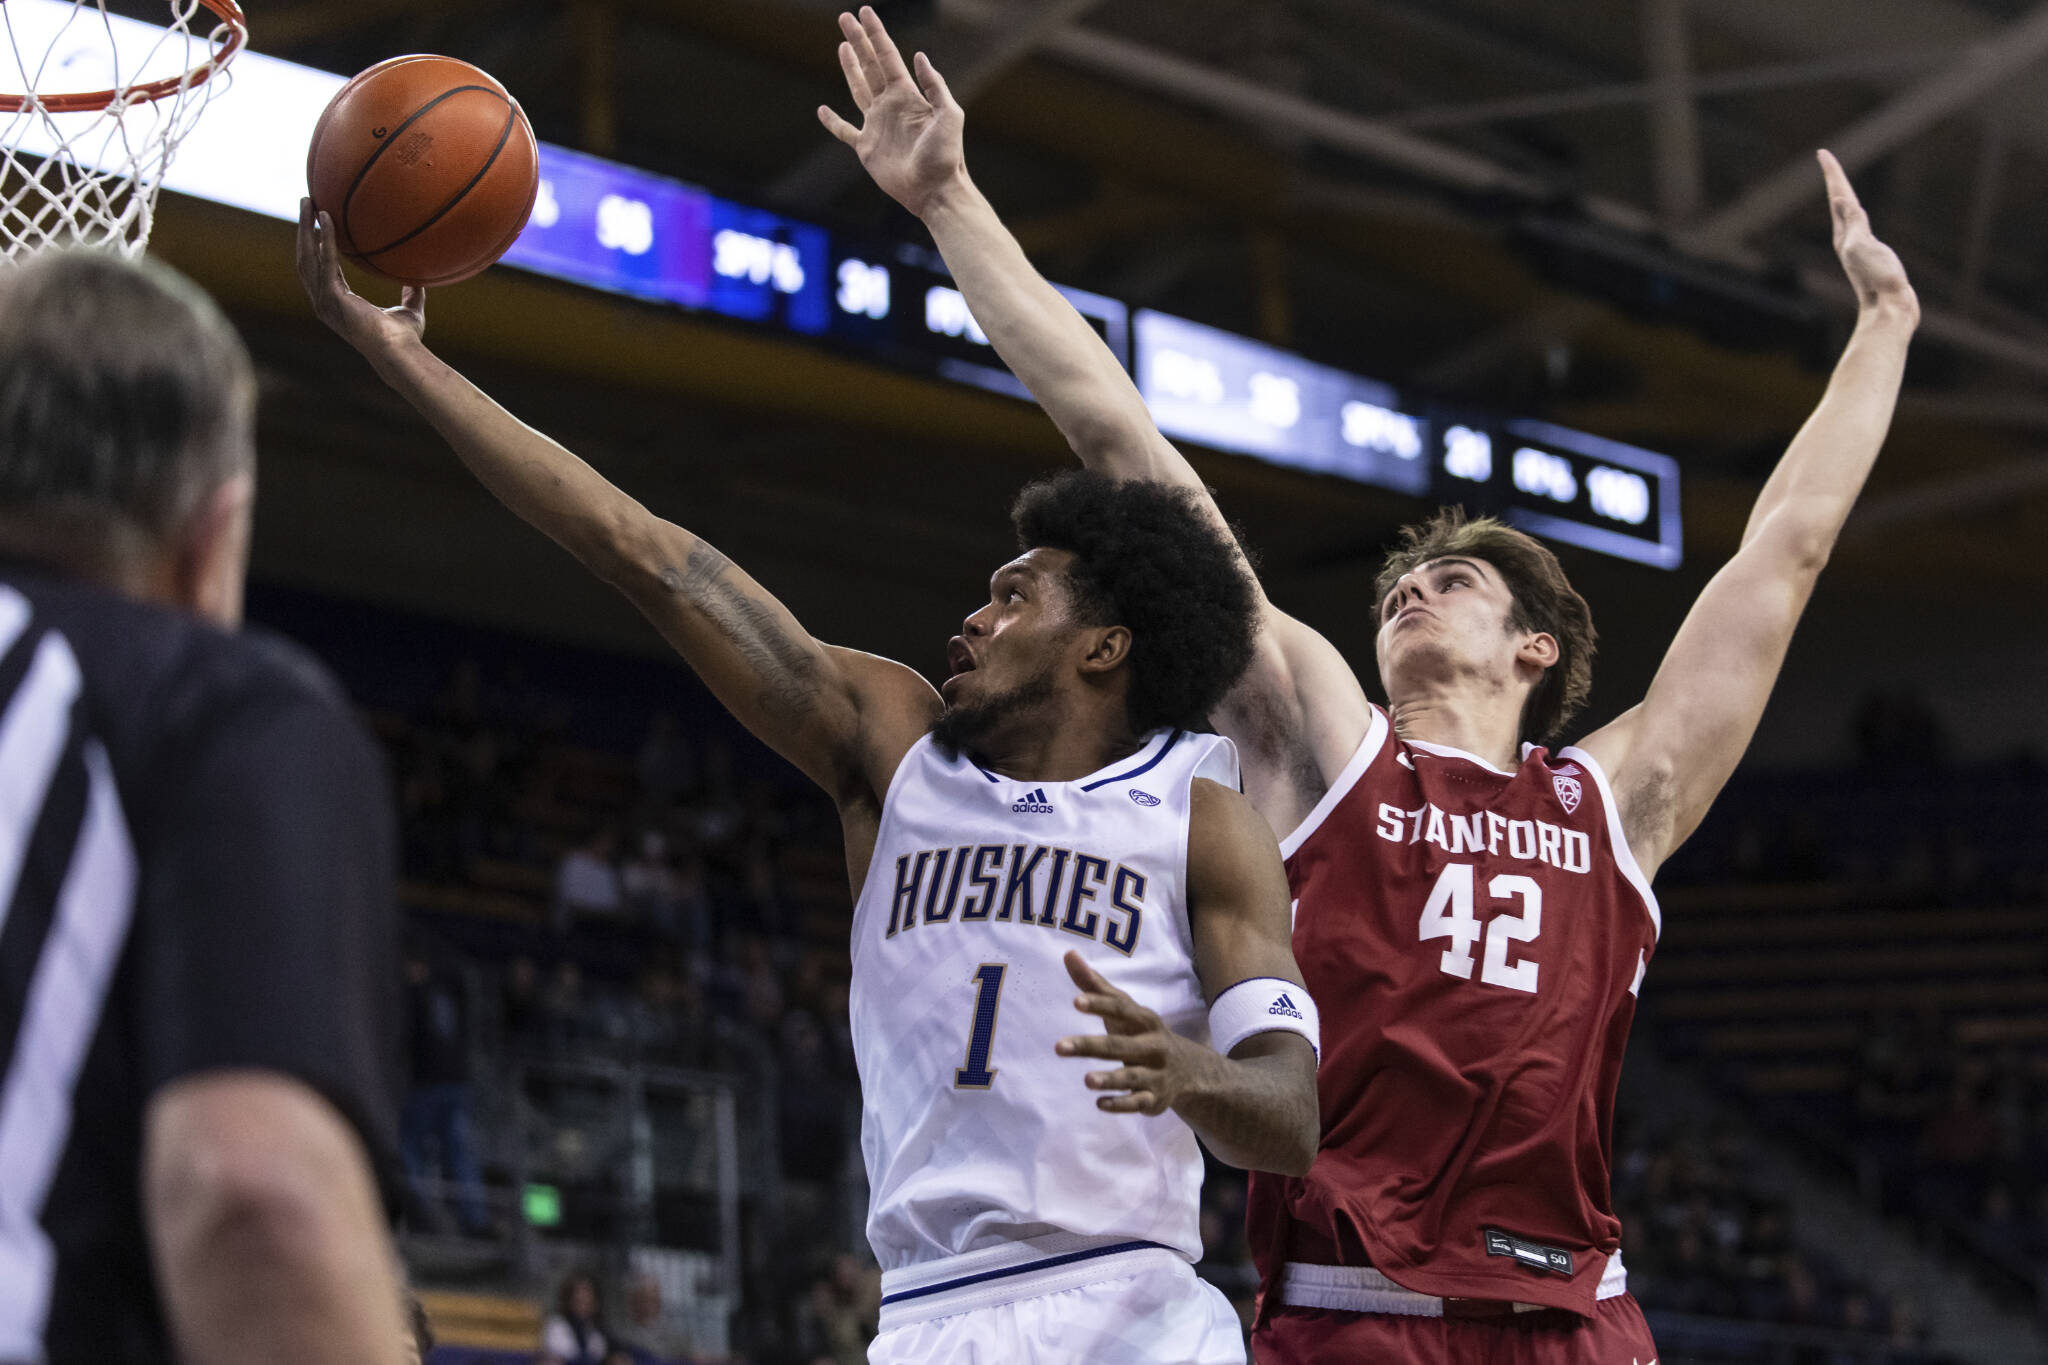 Washington forward Keion Brooks Jr. shoots against Stanford forward Maxime Raynaud during the second half of a game Jan. 12 in Seattle. (AP Photo/Stephen Brashear)